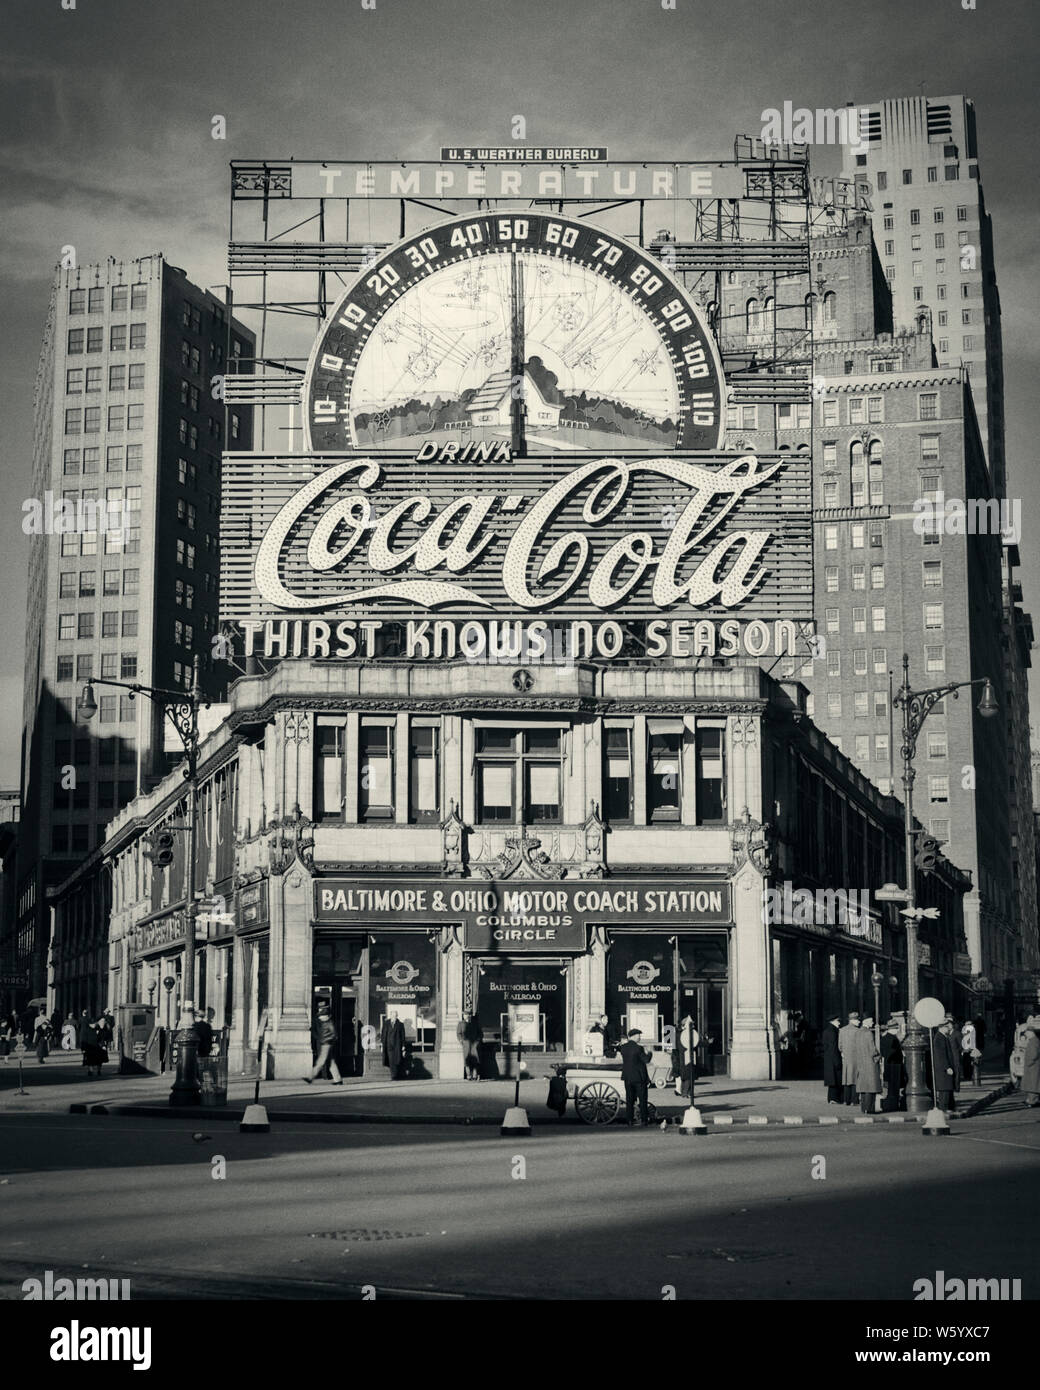 1940s ILLUMINATED COCA COLA SIGN AND DIAL TEMPERATURE THERMOMETER COLUMBUS & OHIO MOTOR COACH STATION COLUMBUS CIRCLE NYC USA - q42344 CPC001 HARS COKE TEMPTATION DIAL MIDTOWN TEMPERATURE ADVERTISEMENT PROPERTY STRATEGY CUSTOMER SERVICE AD AND EXCITEMENT EXTERIOR POWERFUL DIRECTION PRIDE NYC REAL ESTATE CONNECTION CONCEPTUAL NEW YORK STRUCTURES CITIES COLUMBUS CIRCLE STYLISH EDIFICE NEW YORK CITY COCA COLA PROMOTION ILLUMINATED MOTOR COACH SOLUTIONS TERMINAL BLACK AND WHITE COLUMBUS OLD FASHIONED WEST SIDE Stock Photo